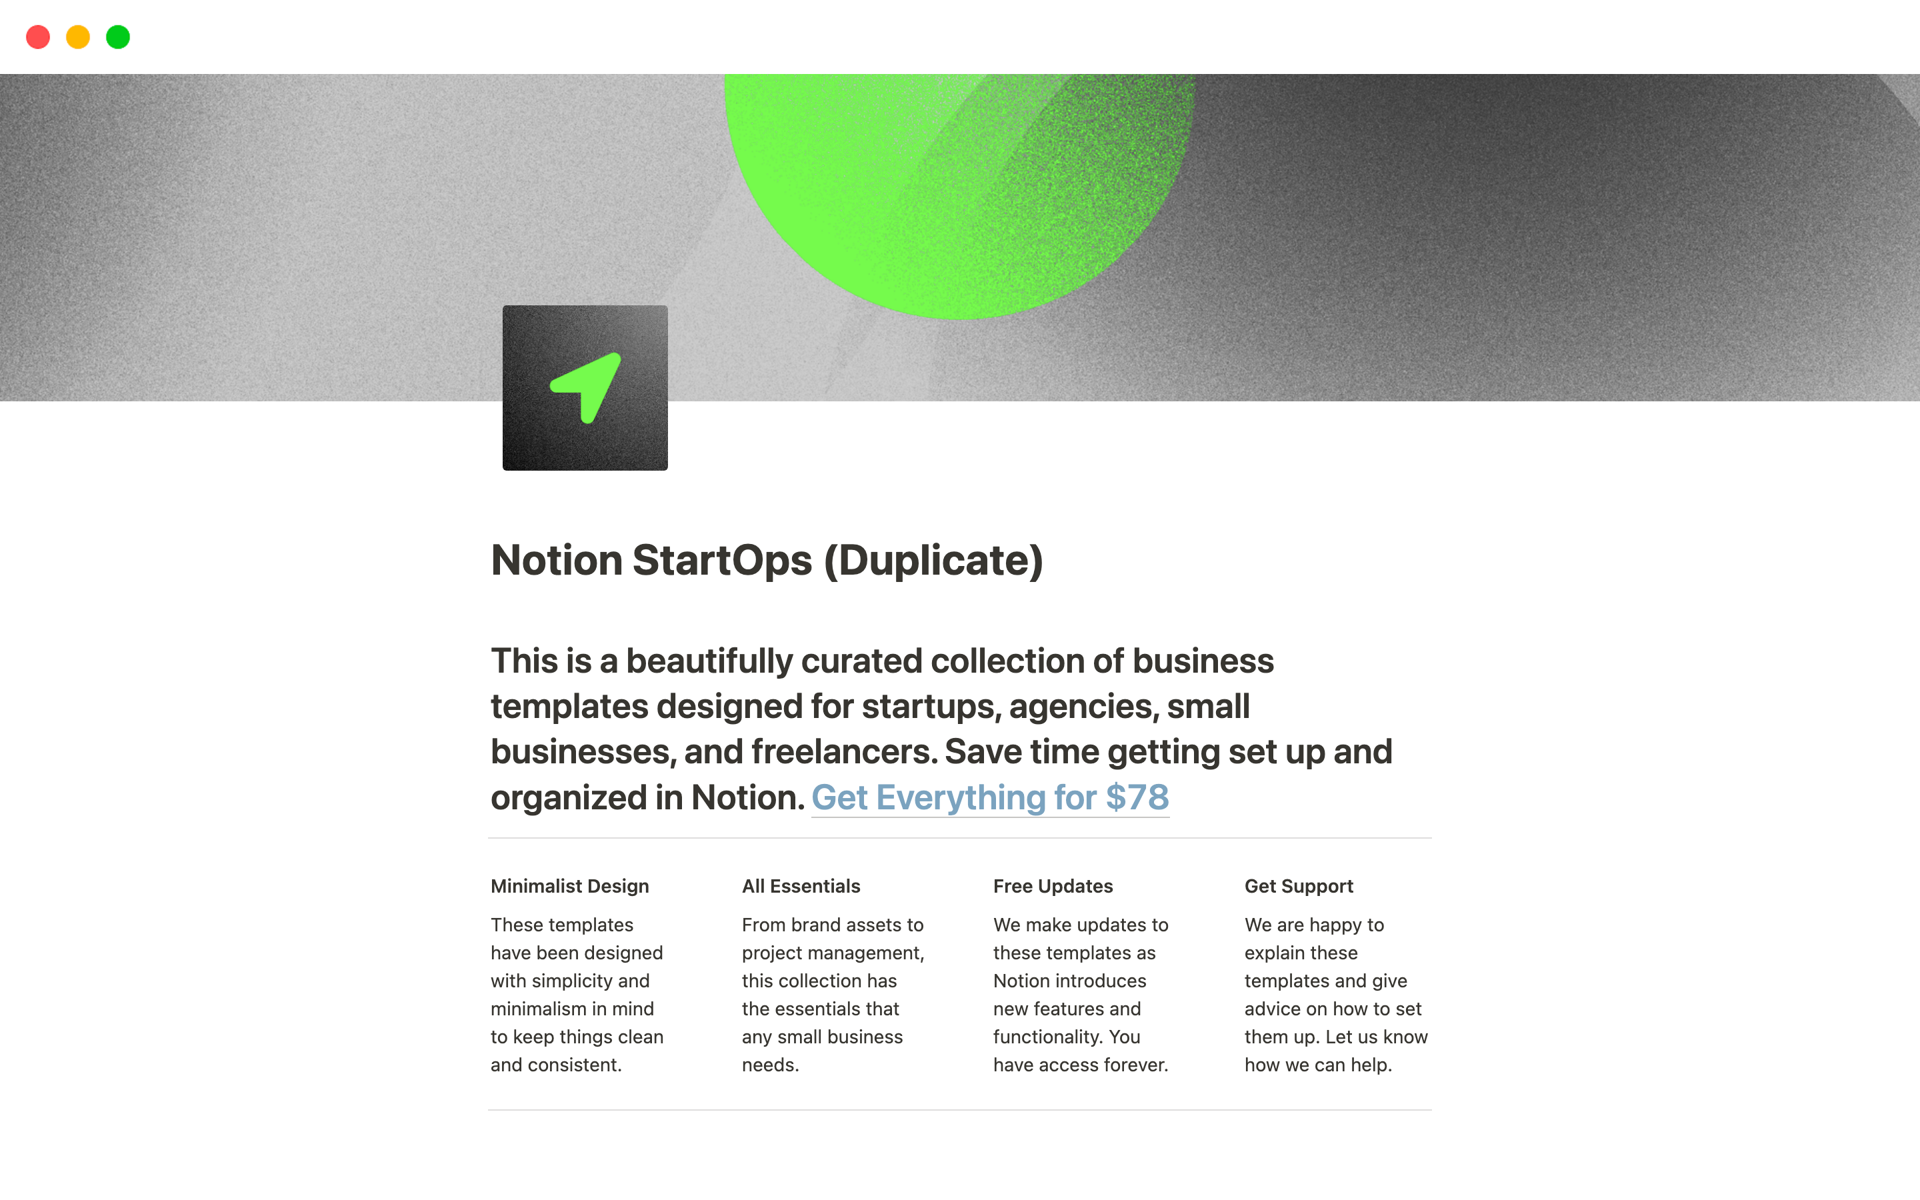 This is a slick business operation system designed specifically for startups, agencies, small businesses, and freelancers to streamline common business needs from operations to marketing.